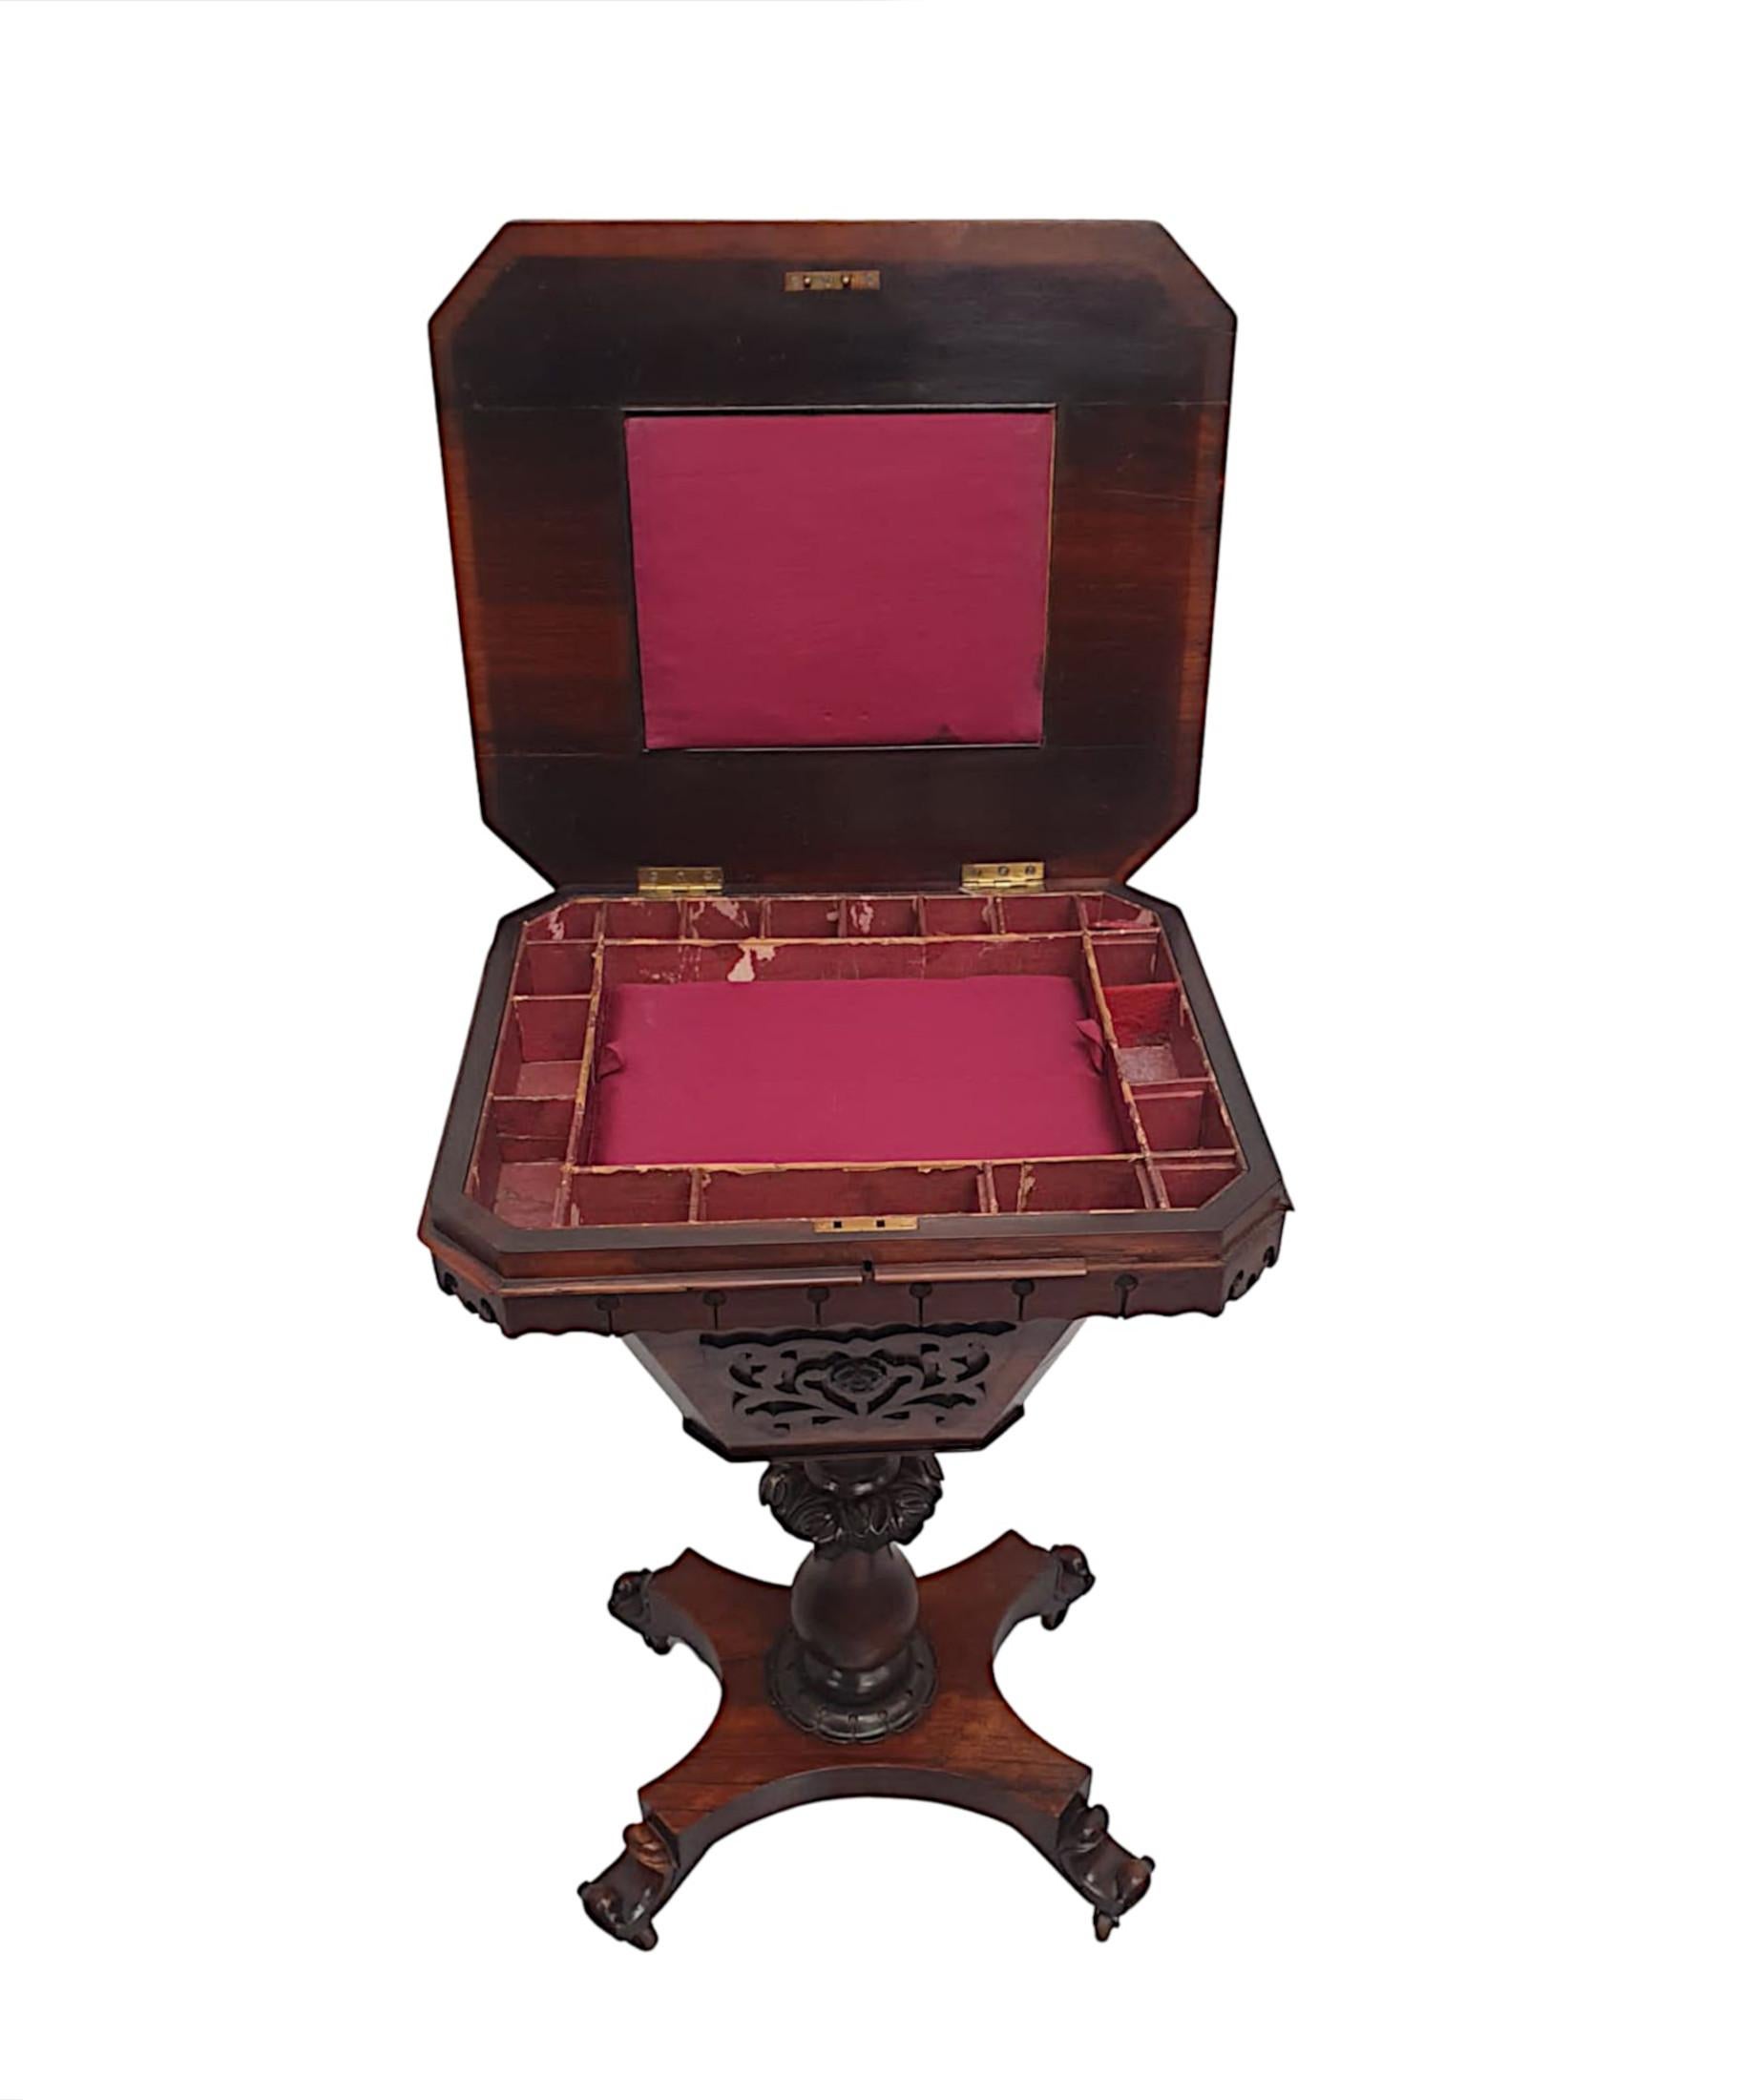 A very fine 19th Century fruitwood workbox or occasional table of fabulous quality with rich patination and grain.  The well figured line inlaid and crossbanded top of rectangular form with canted corners opens upwards to reveal a beautifully lined